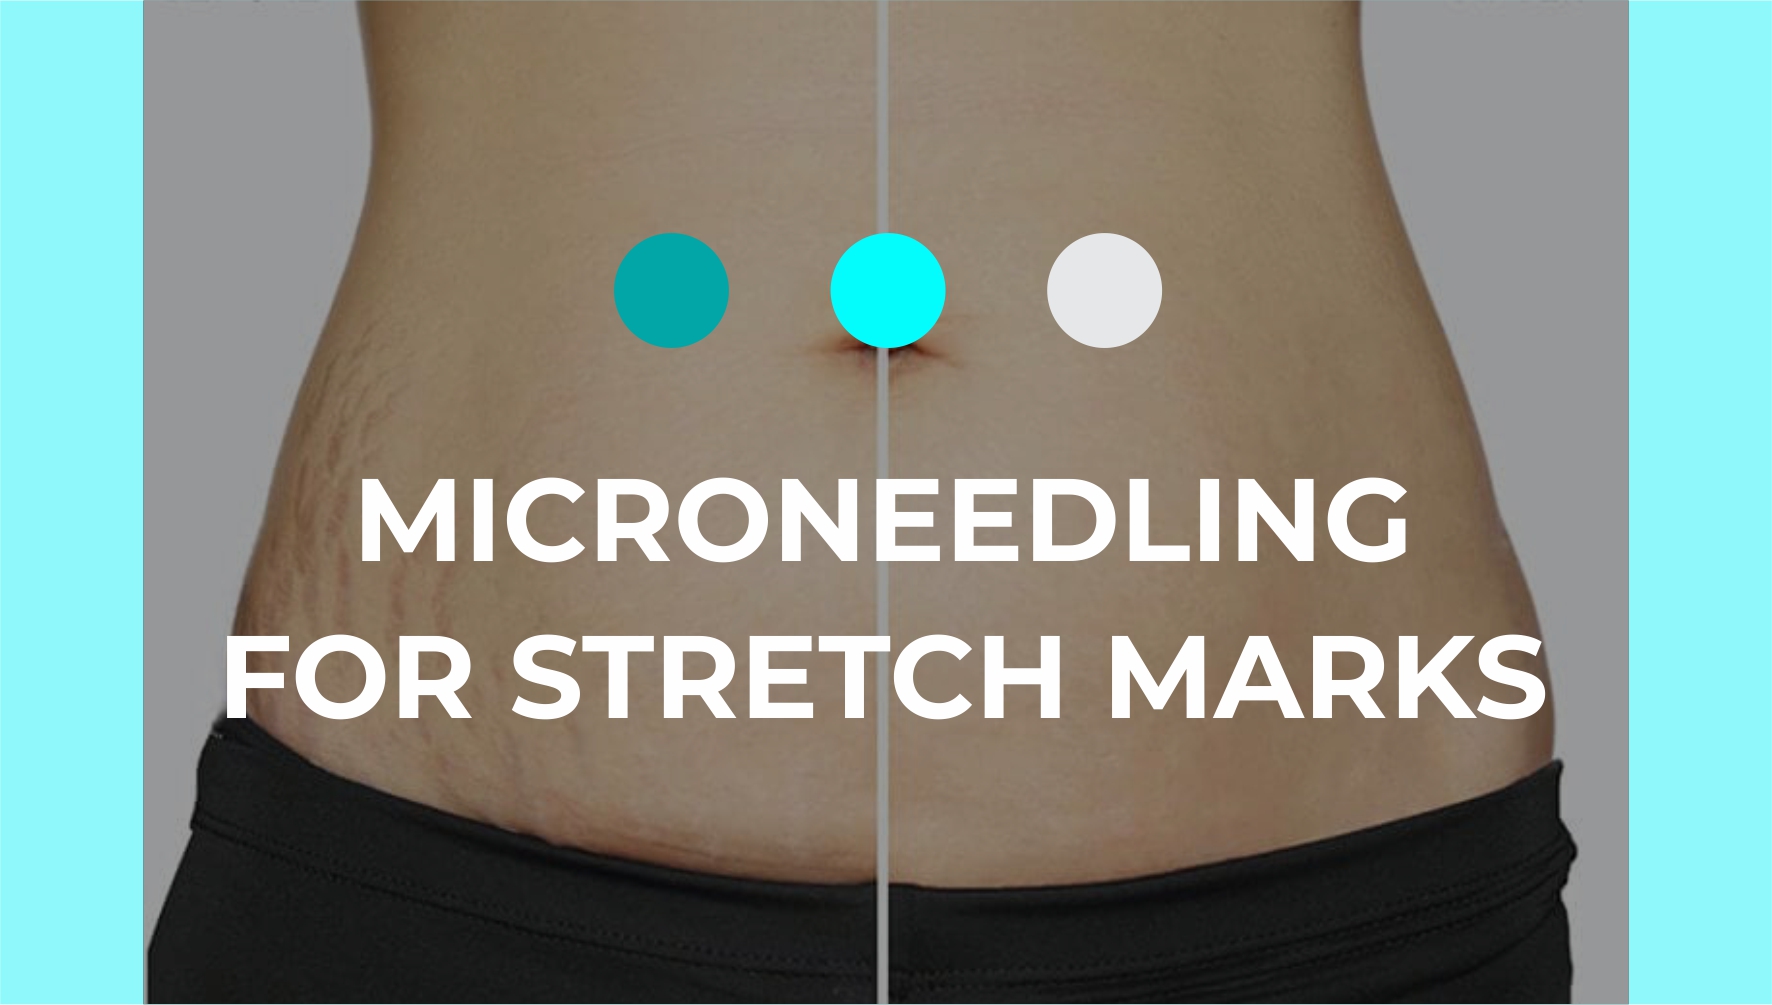 Is Microneedling Effective for Stretch Marks?